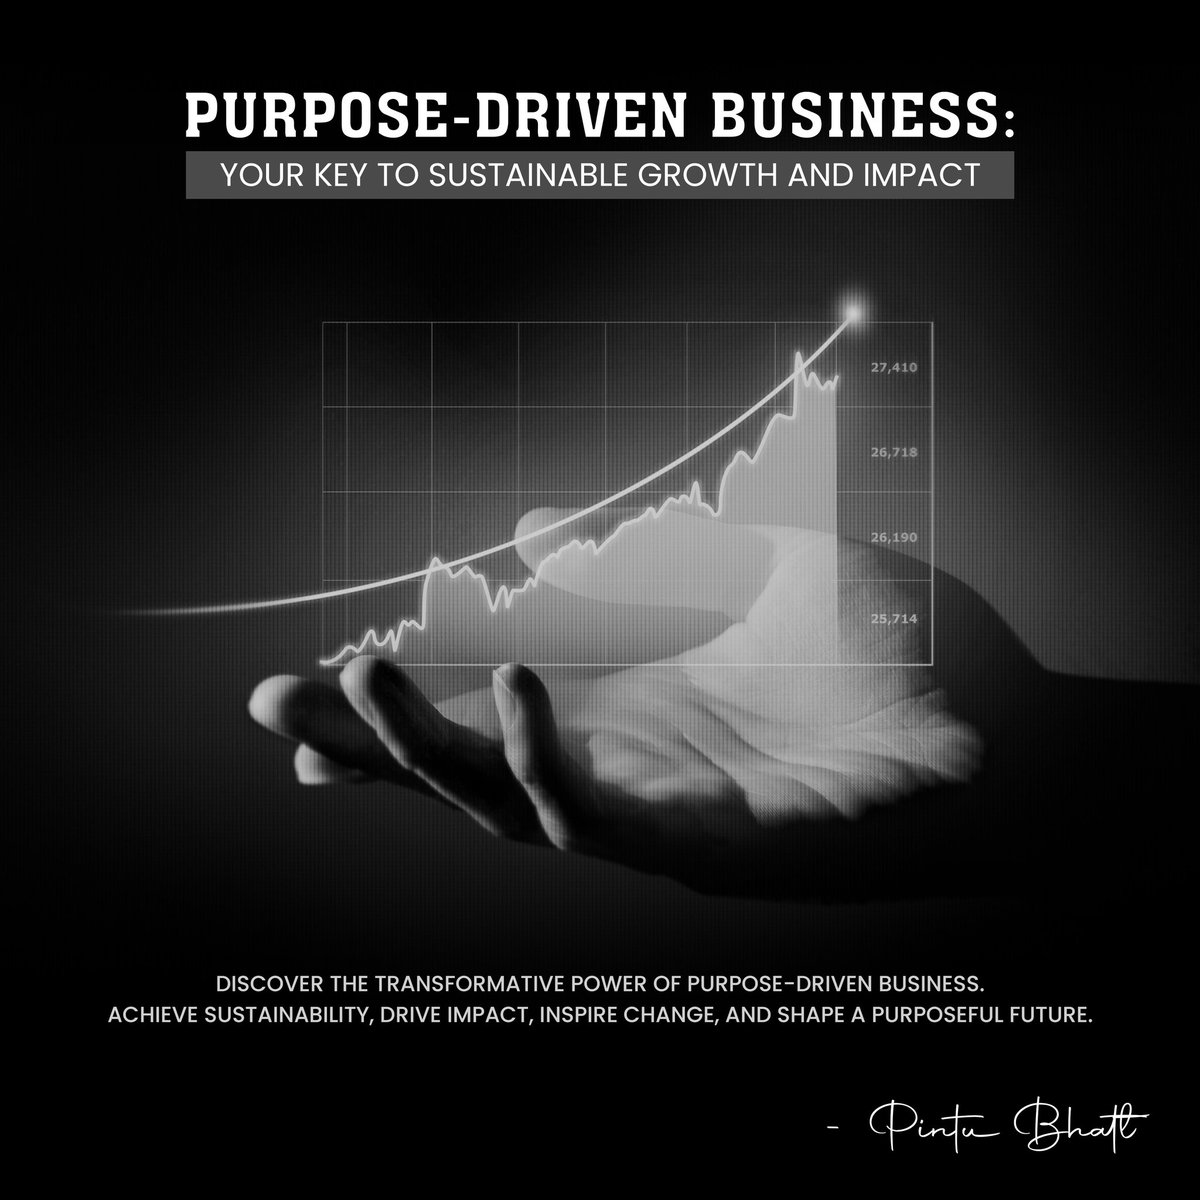 Transform your #PurposeDrivenBusiness! 🌍Drive impact, inspire change, and shape a sustainable future. 

#SustainableGrowth #Impact #ChangeMakers #ImpactDriven #BusinessWithPurpose #InspireChange